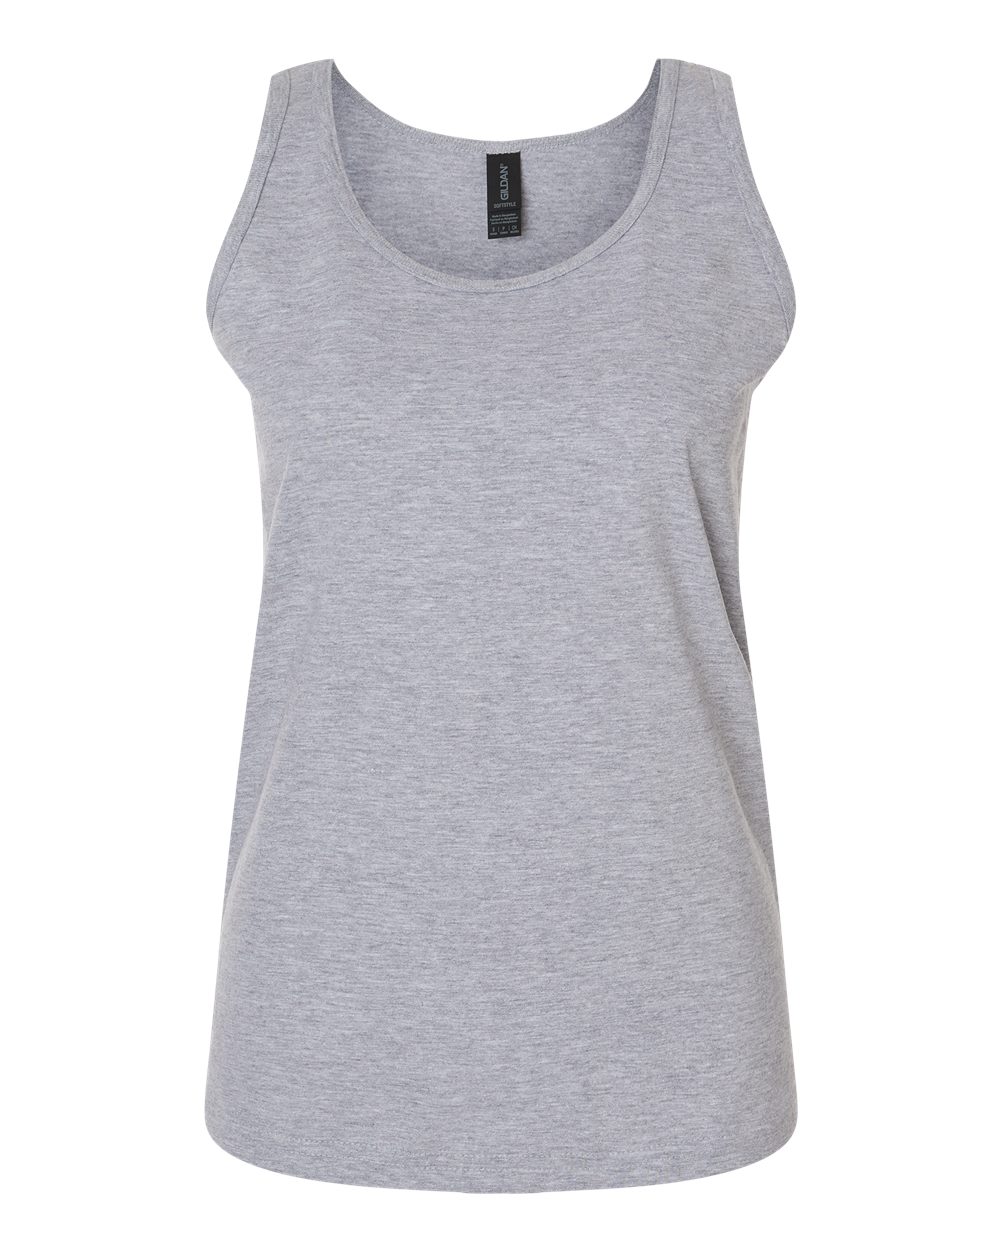 Softstyle®Womens Tank Top-